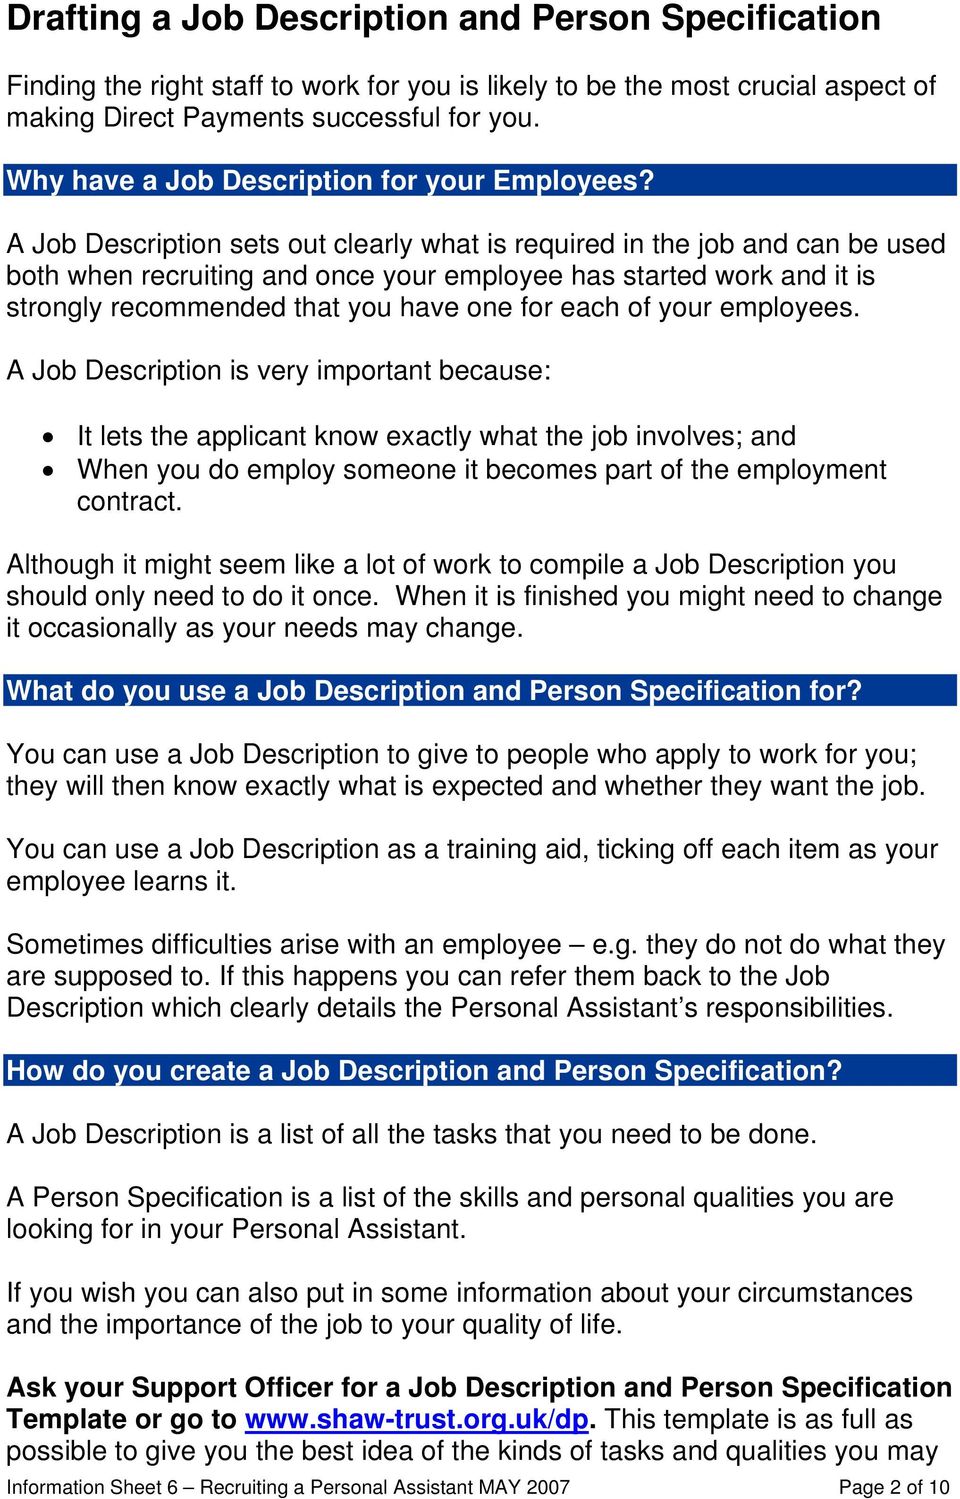 A Job Description sets out clearly what is required in the job and can be used both when recruiting and once your employee has started work and it is strongly recommended that you have one for each